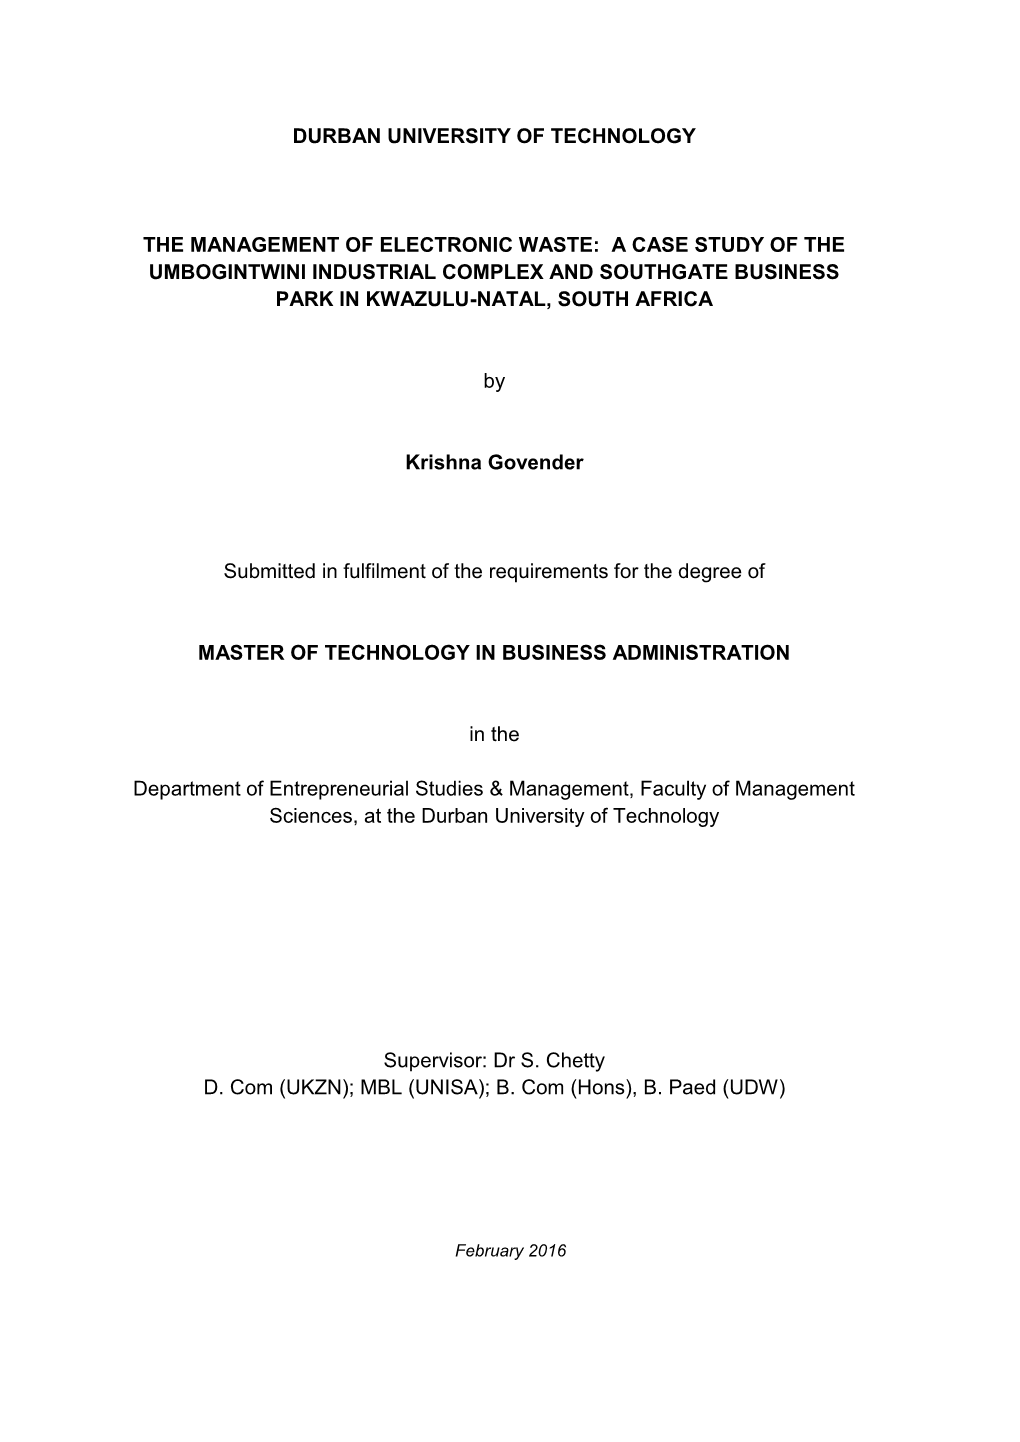 The Management of Electronic Waste: a Case Study of the Umbogintwini Industrial Complex and Southgate Business Park in Kwazulu-Natal, South Africa